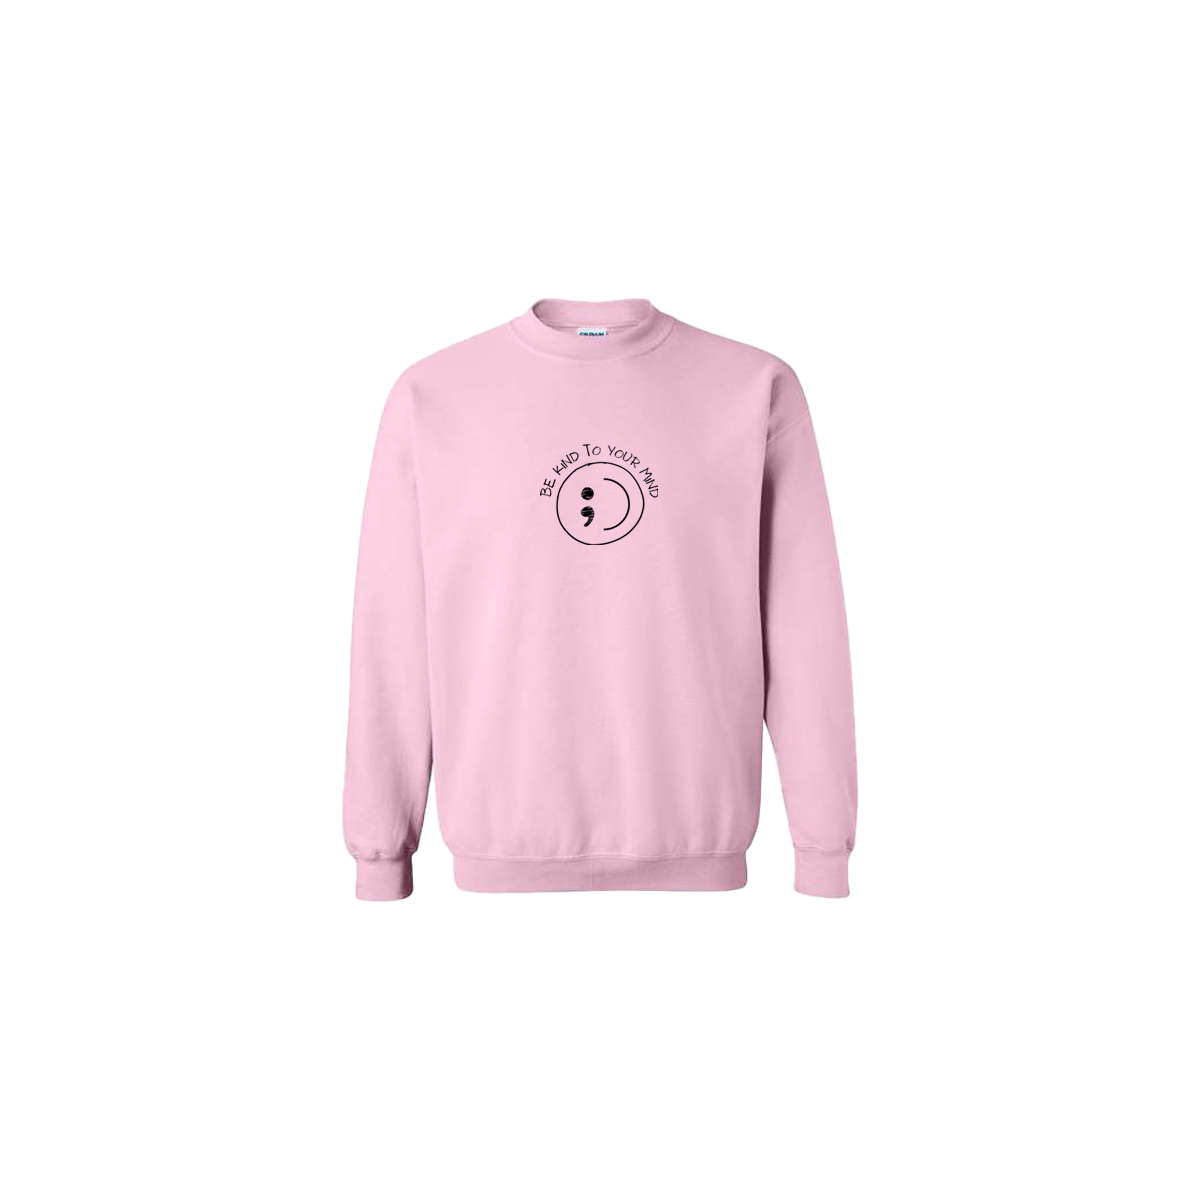 Be Kind To Your Mind Smiley Face Embroidered Light Pink Crewneck - Mental Health Awareness Clothing